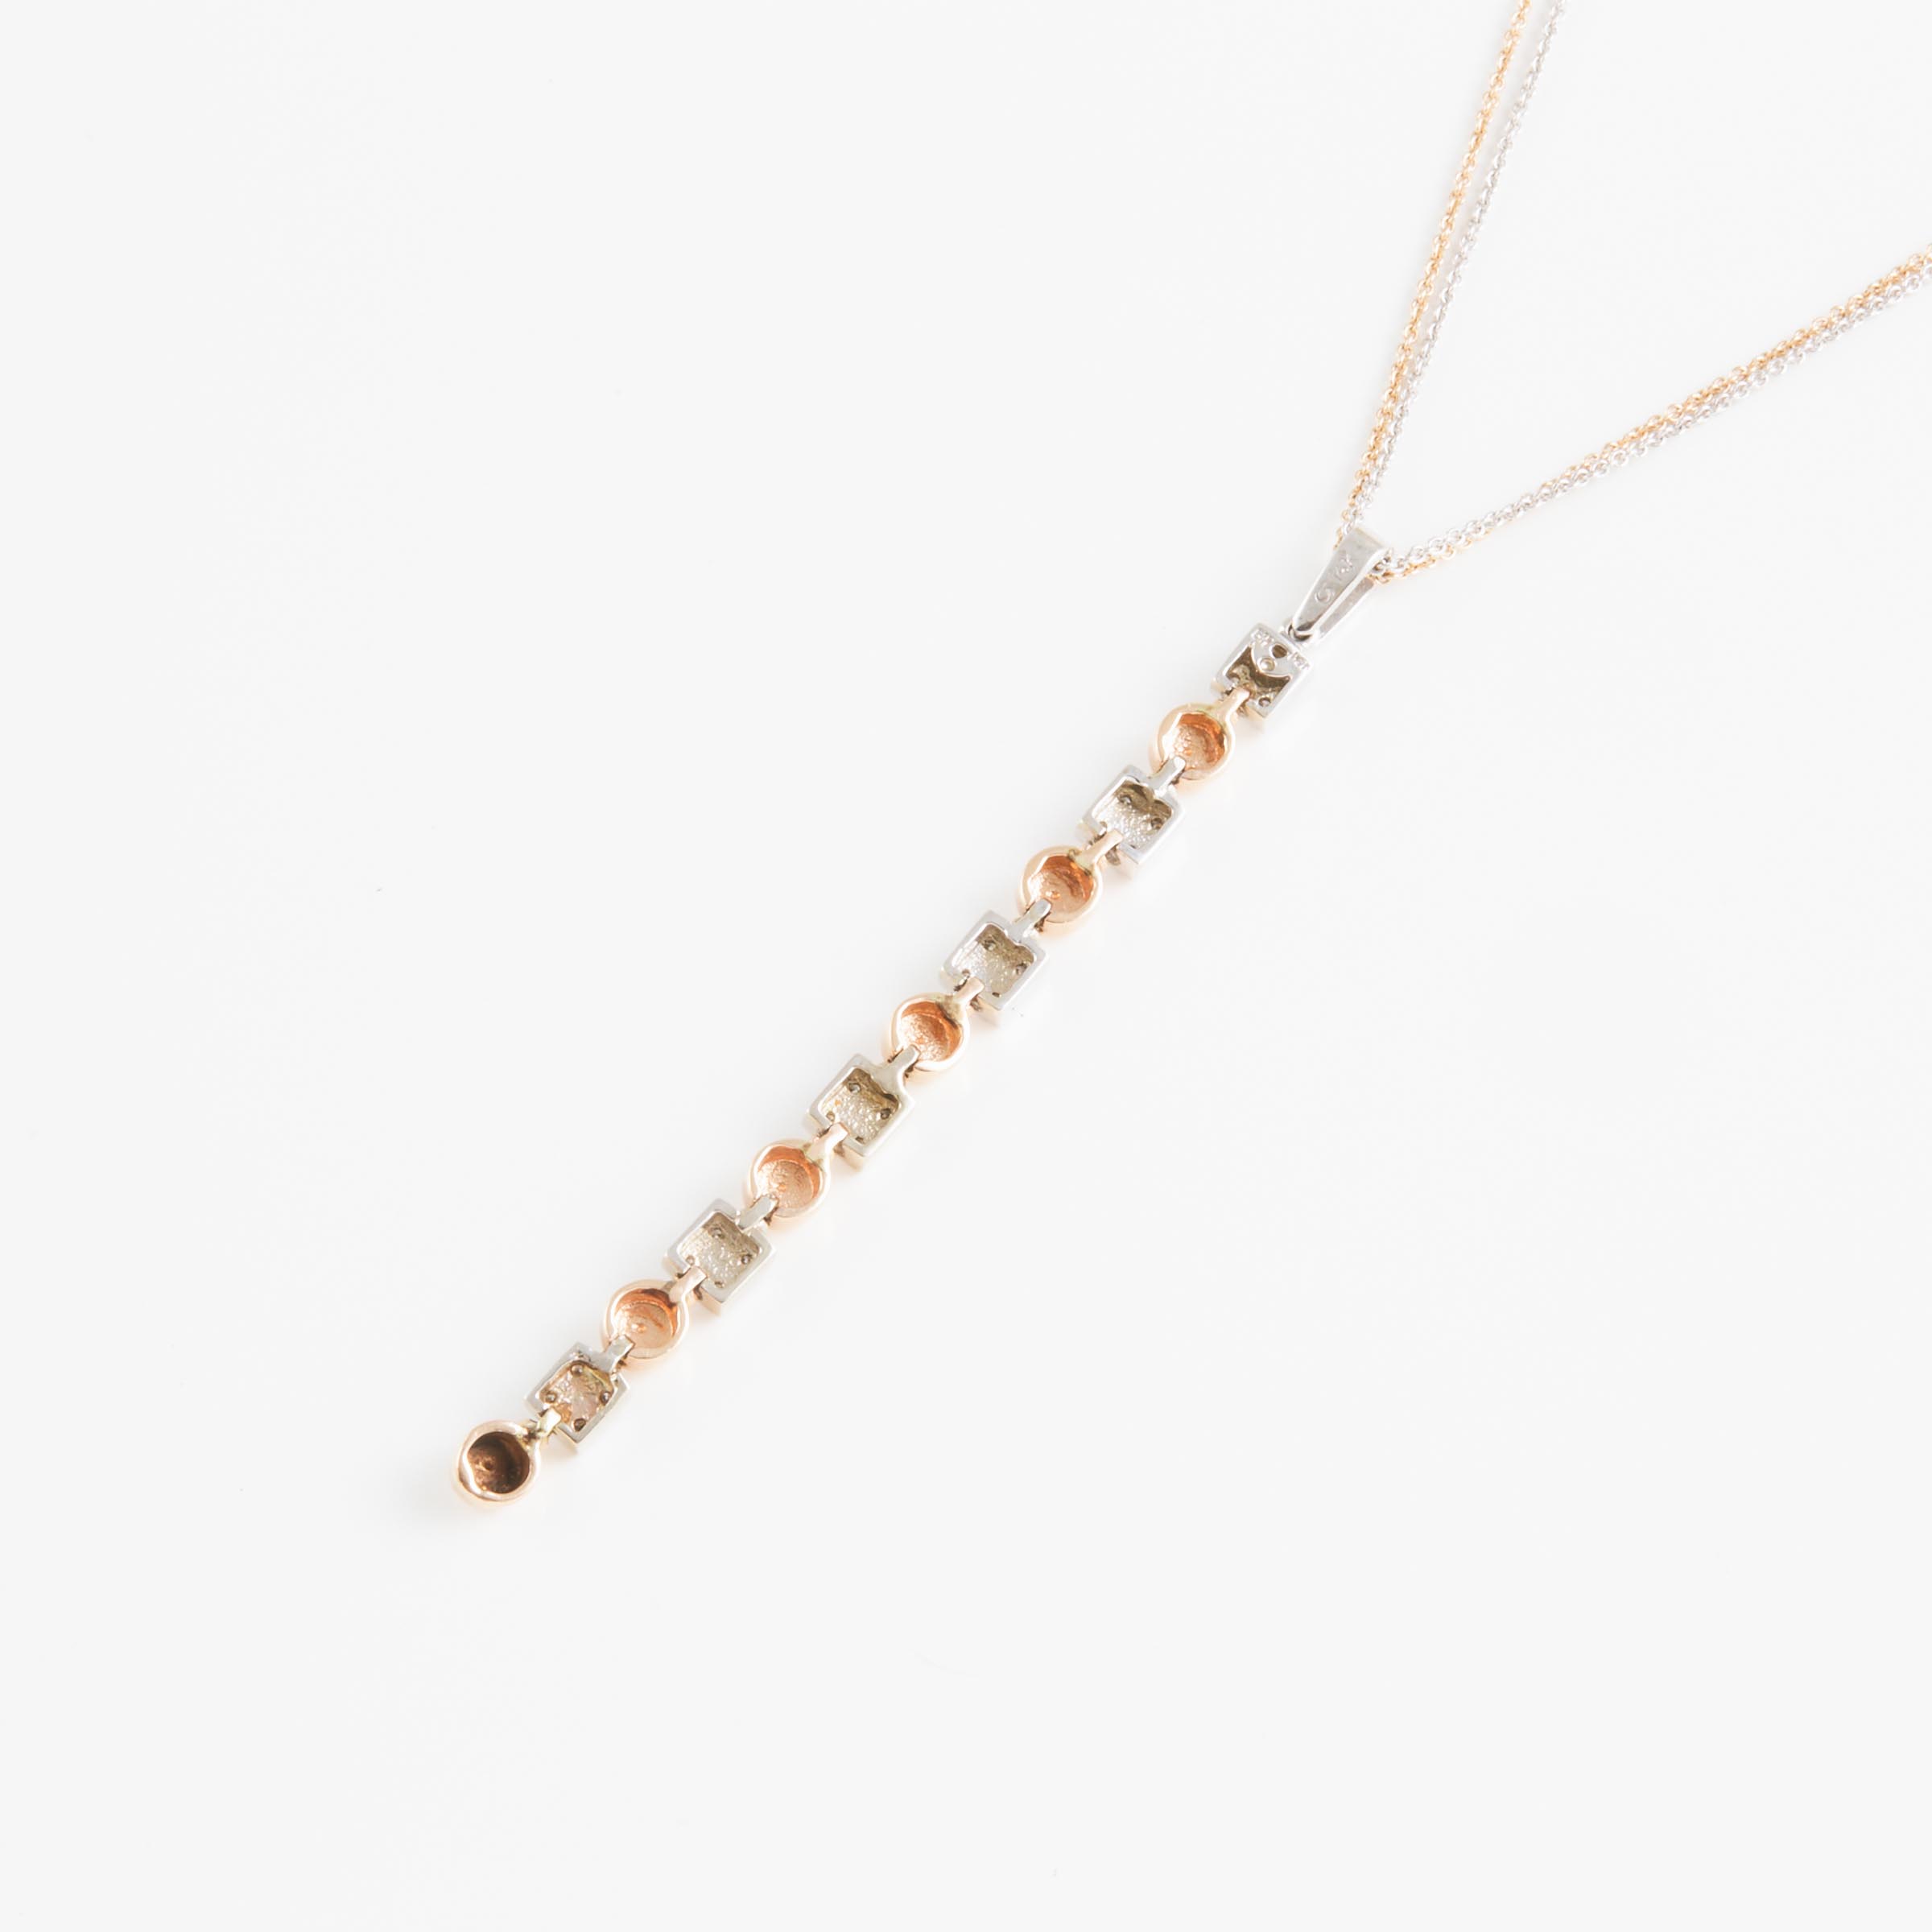 Italian 14k White And Rose Gold Necklace